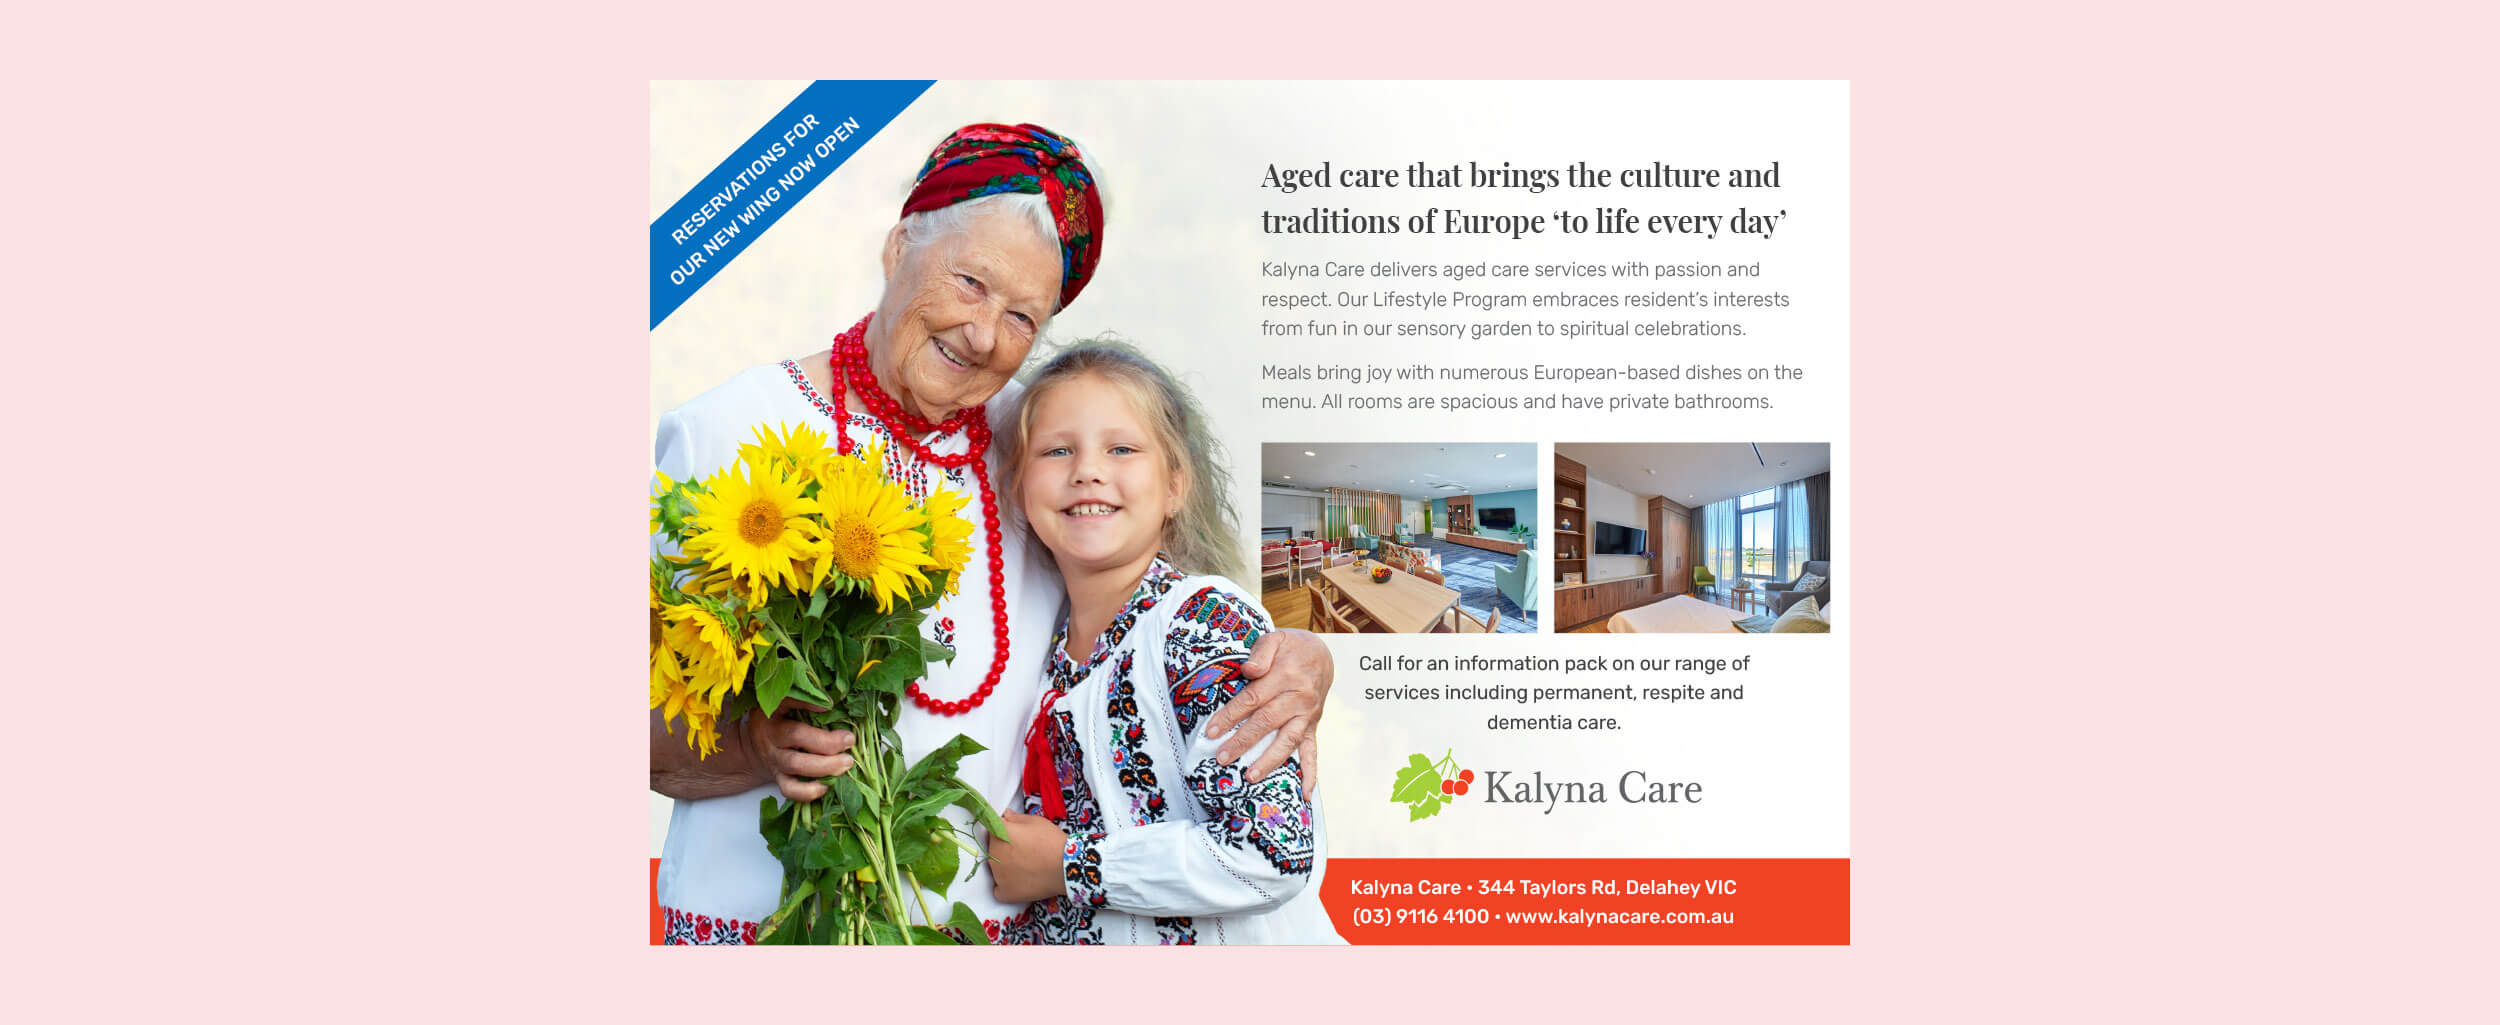 Kalyna Care half page press advertisement